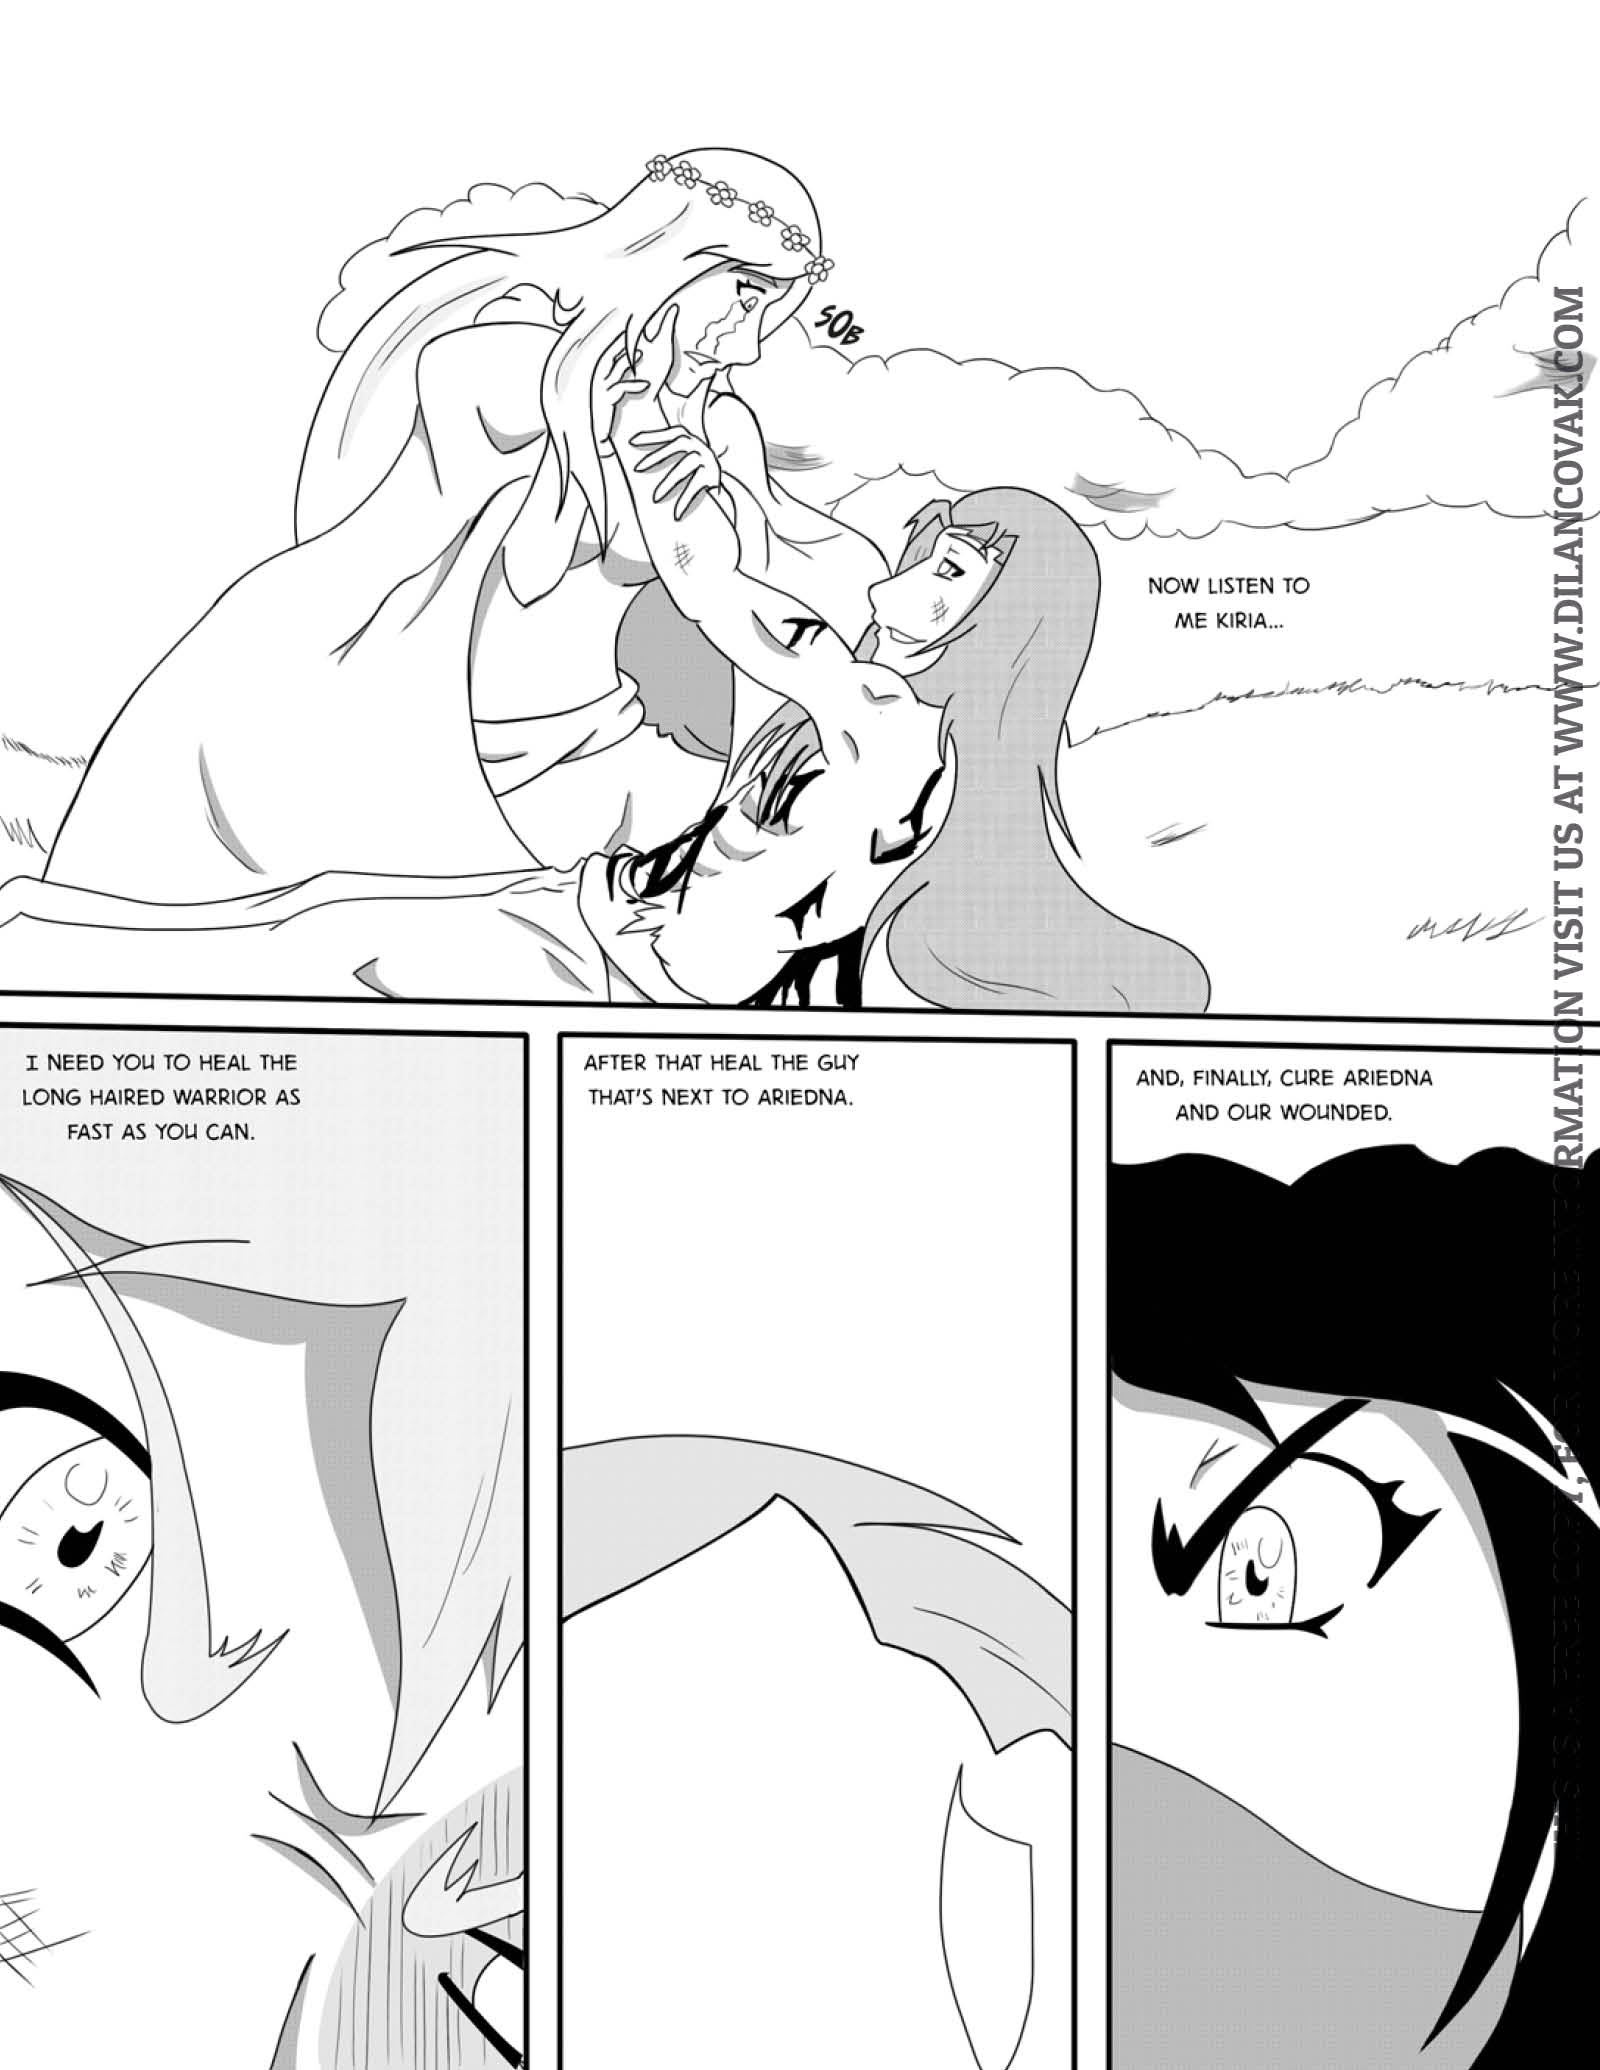 Series Dilan: the Chronicles of Covak - Chapter 7 - Page 8 - Language ENG